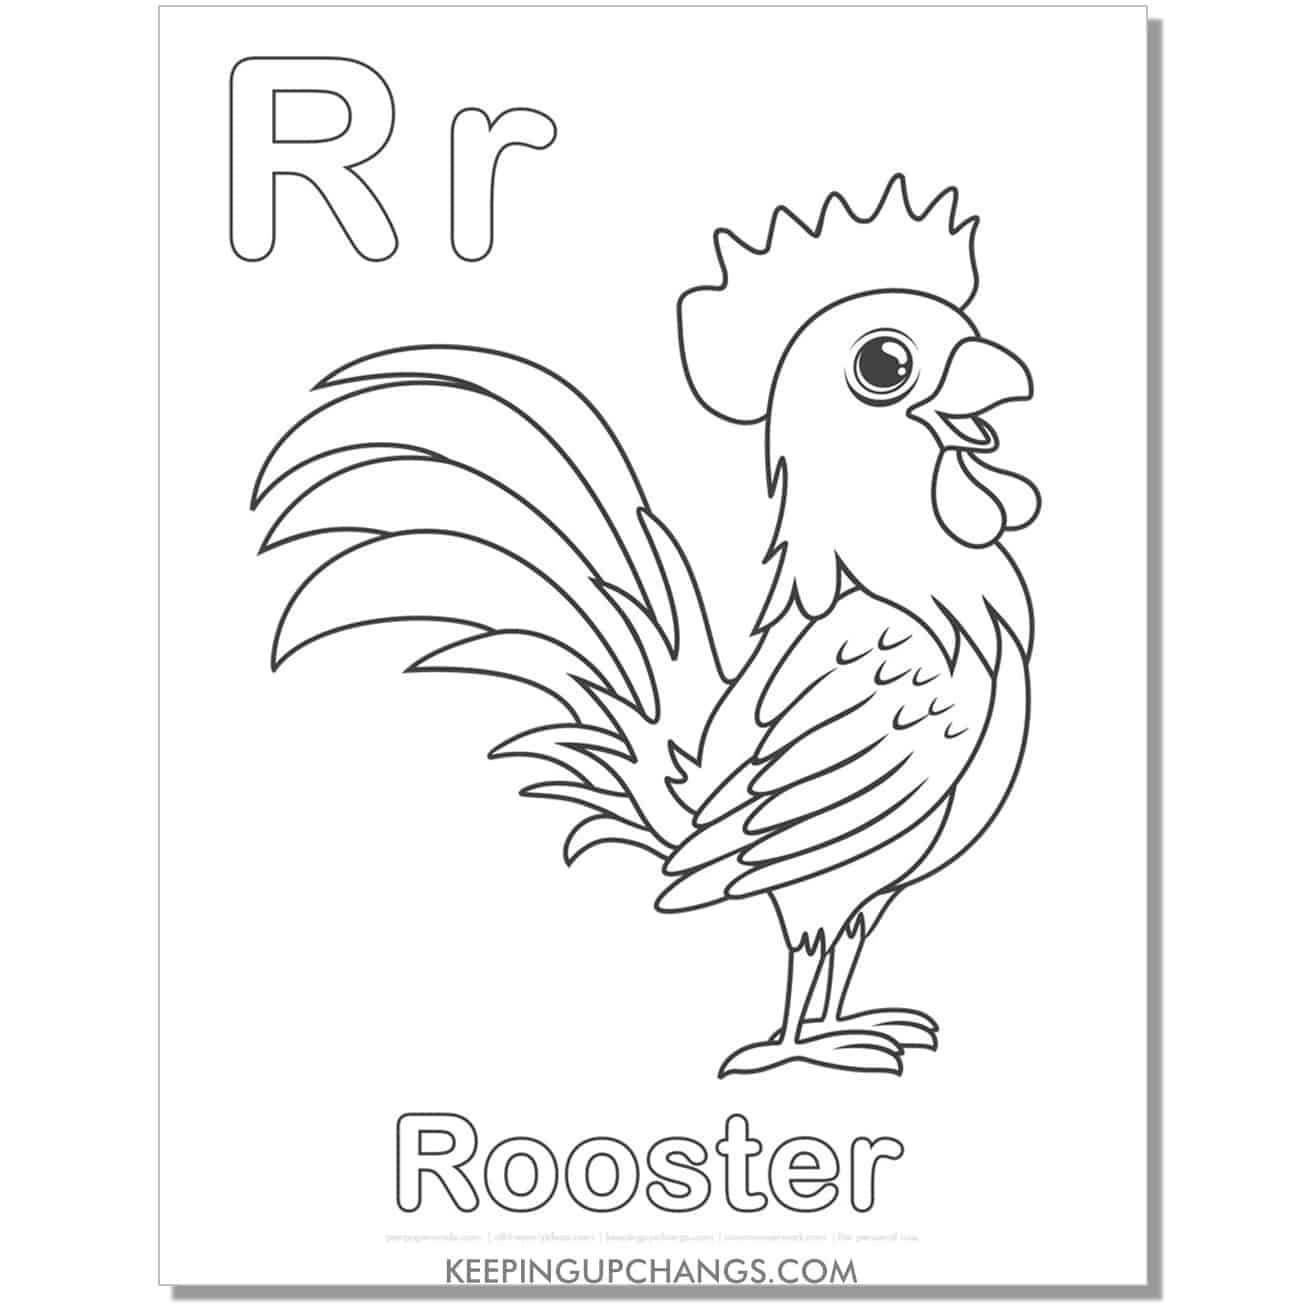 abc coloring sheet, r for rooster.